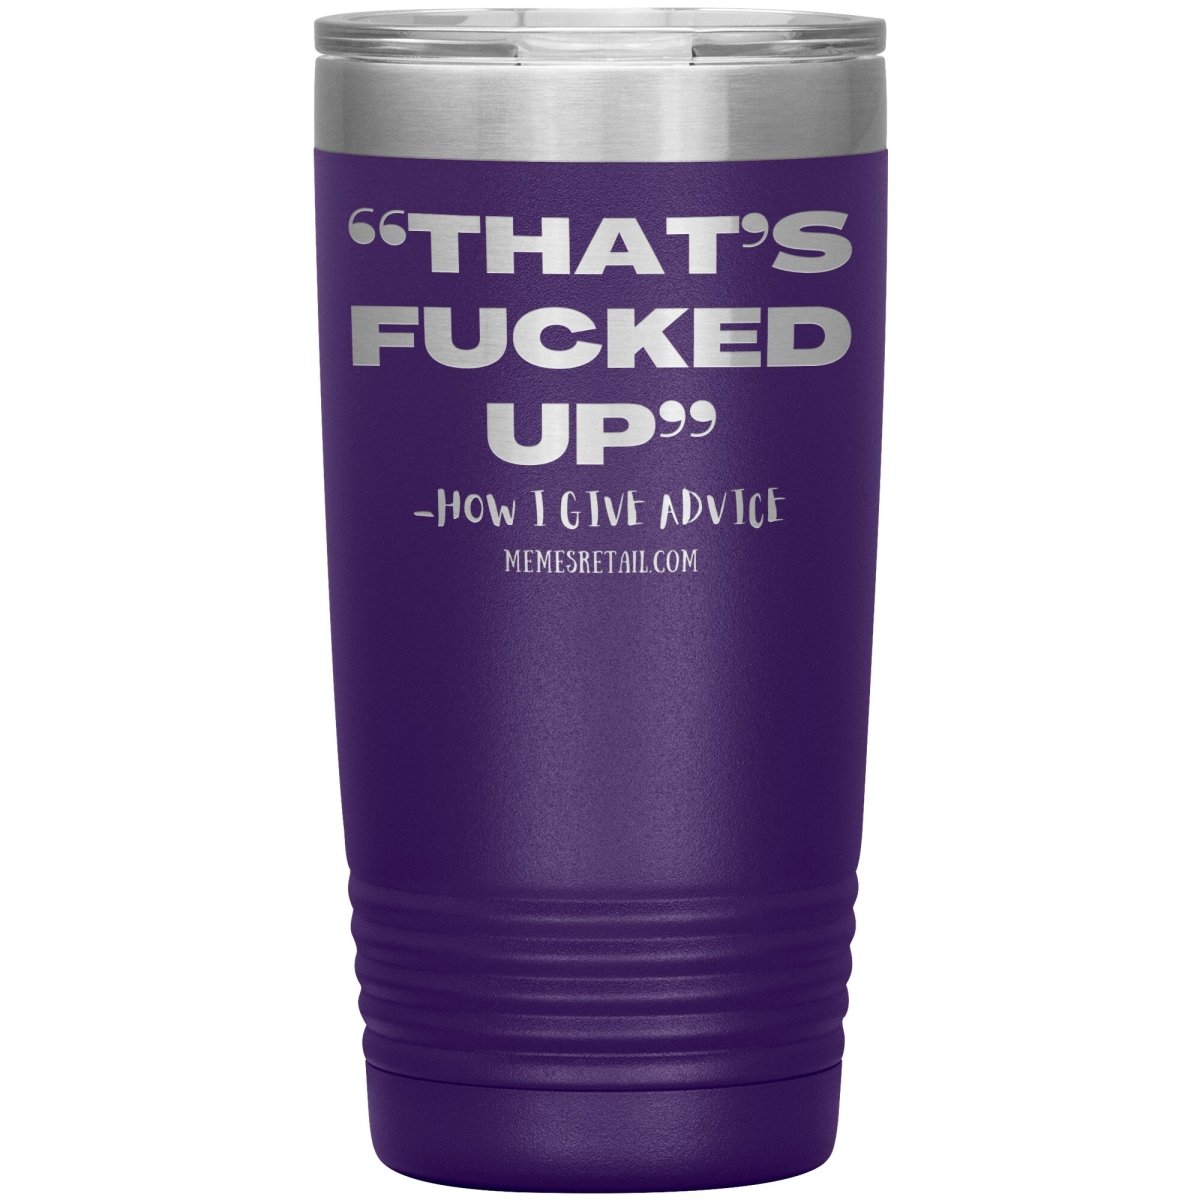 “That’s Fucked Up” -how I give advice Tumblers, 20oz Insulated Tumbler / Purple - MemesRetail.com